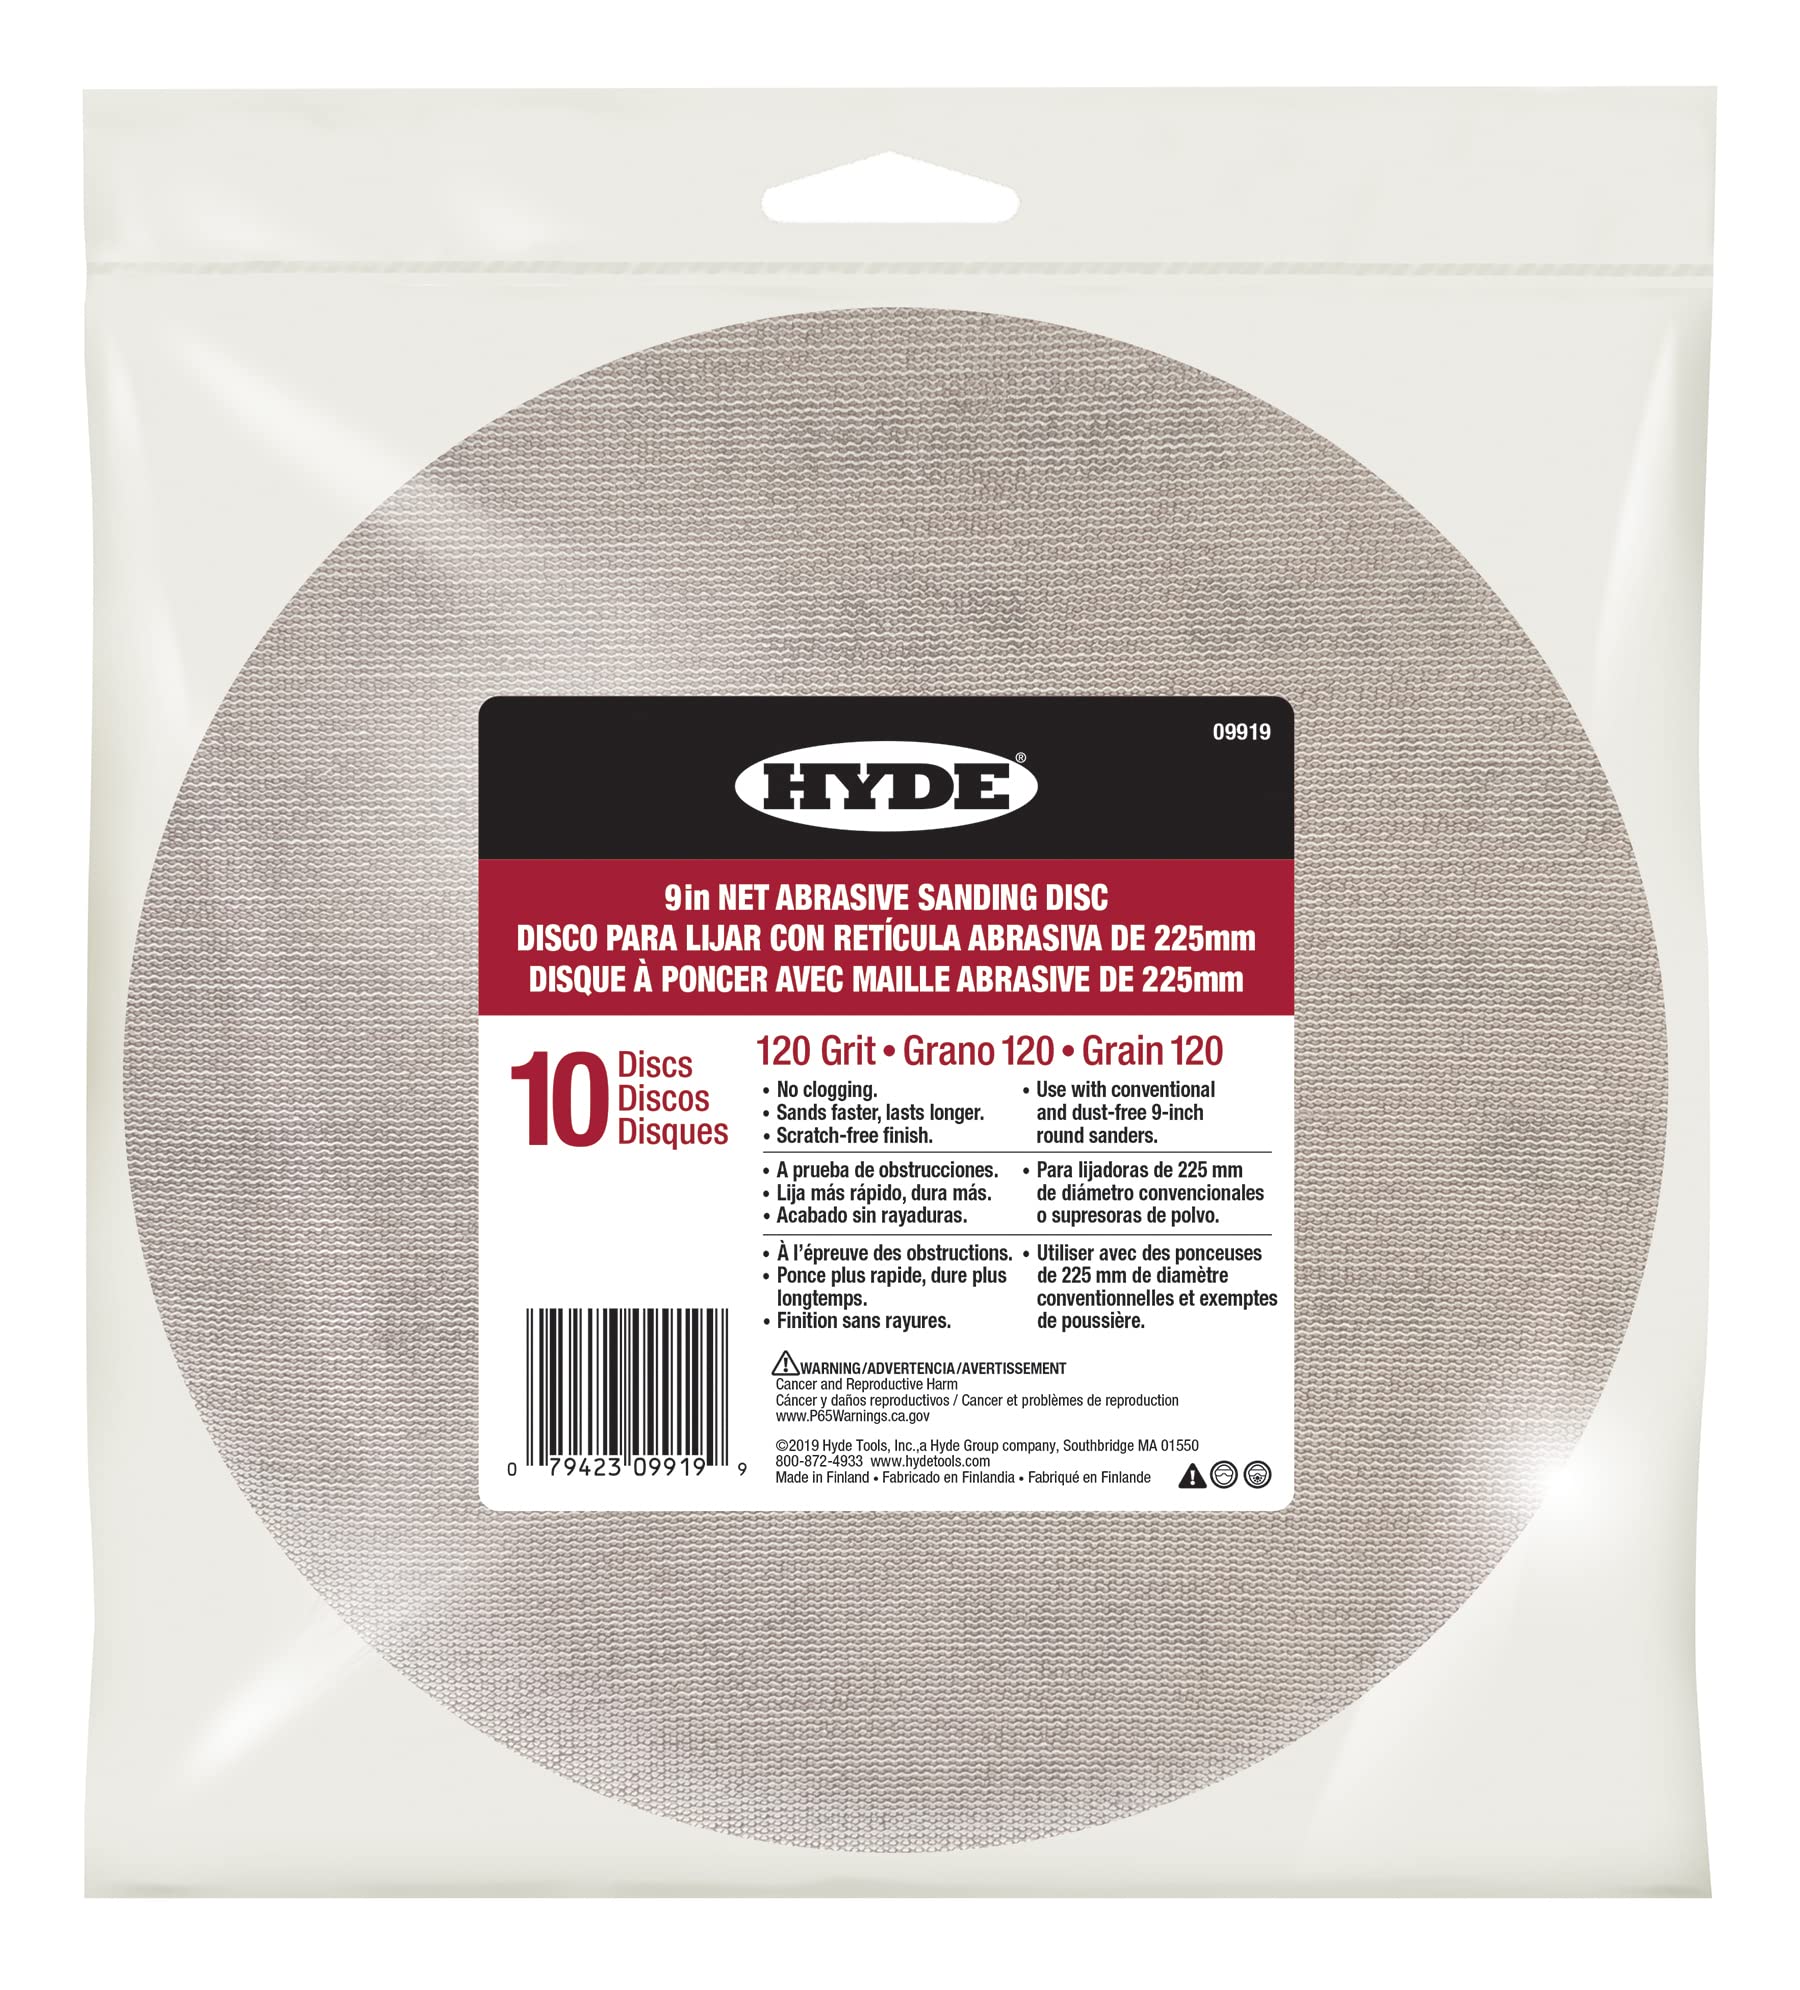 Hyde 09919 9" Disk Abrasive Sanding Net, 120 Grit, 10 Count. Large area Sanding, Fast Change abrasive sheets for a Scratch Free Smooth No-Sanding pattern.